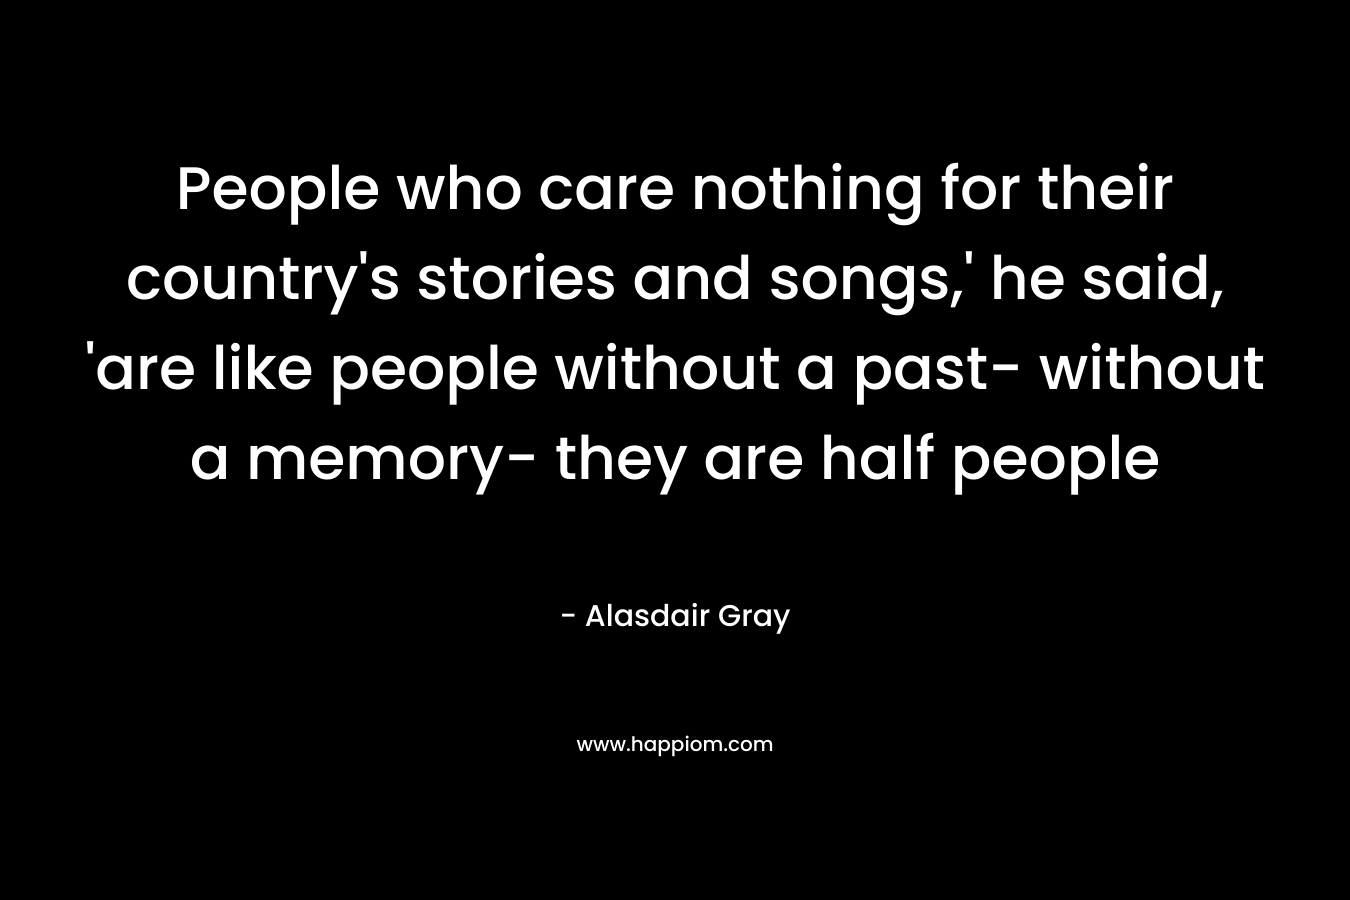 People who care nothing for their country's stories and songs,' he said, 'are like people without a past- without a memory- they are half people